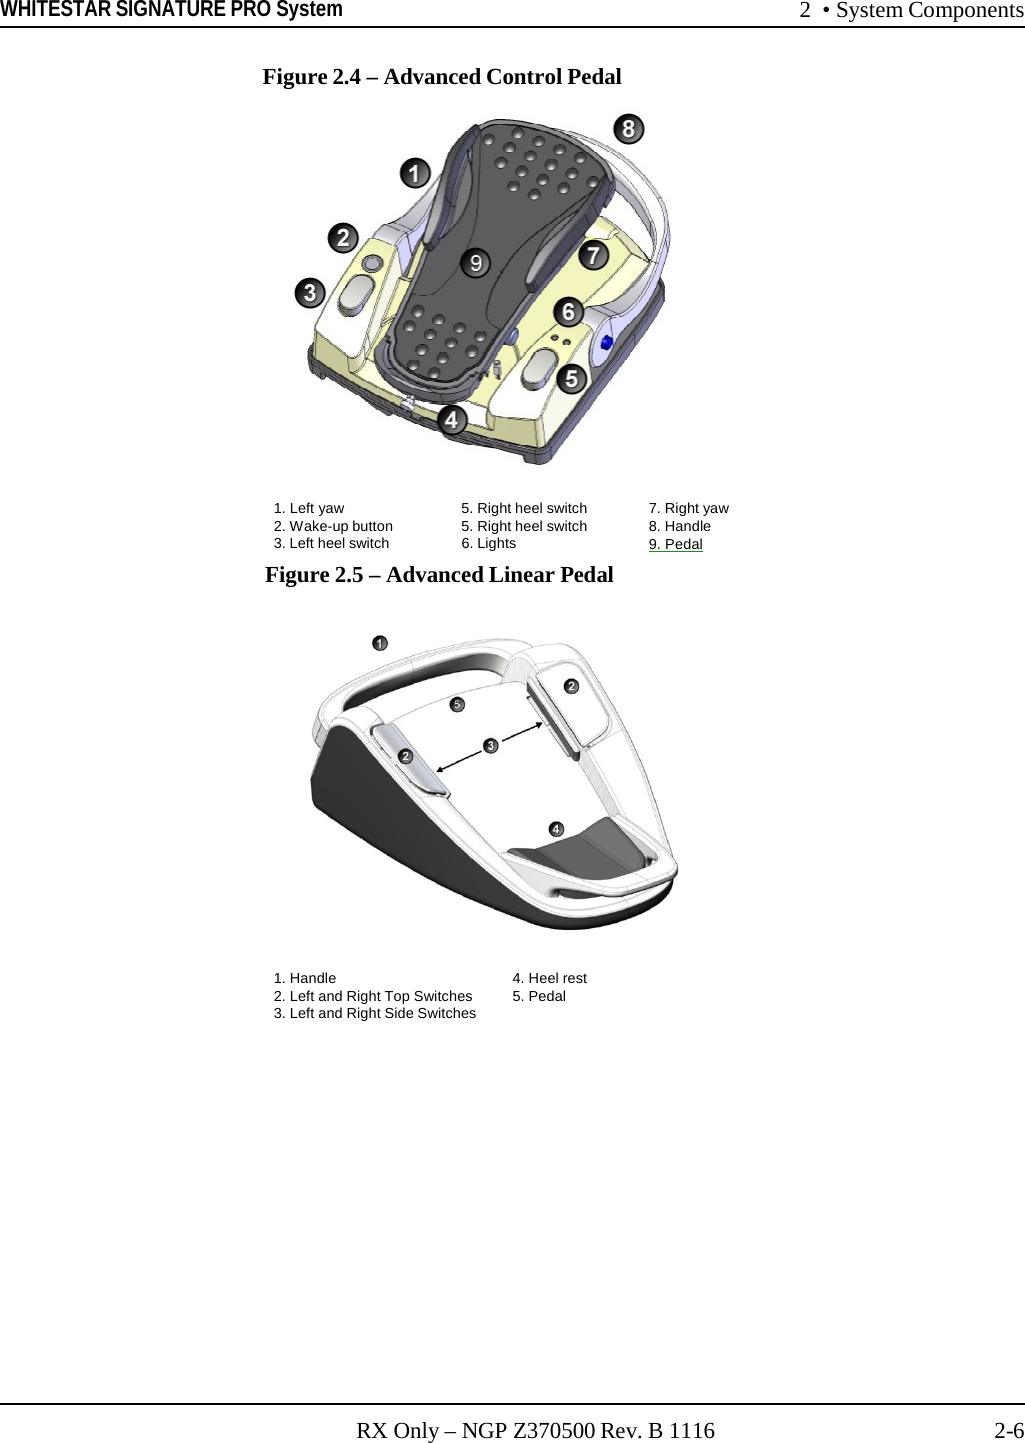 WHITESTAR SIGNATURE PRO System 2  • System Components RX Only – NGP Z370500 Rev. B 1116 2-6   1. Left yaw 5. Right heel switch 7. Right yaw 2. Wake-up button 5. Right heel switch 8. Handle 3. Left heel switch 6. Lights 9. Pedal    Figure 2.4 – Advanced Control Pedal     Figure 2.5 – Advanced Linear Pedal   1. Handle  4. Heel rest 2. Left and Right Top Switches  5. Pedal 3. Left and Right Side Switches 